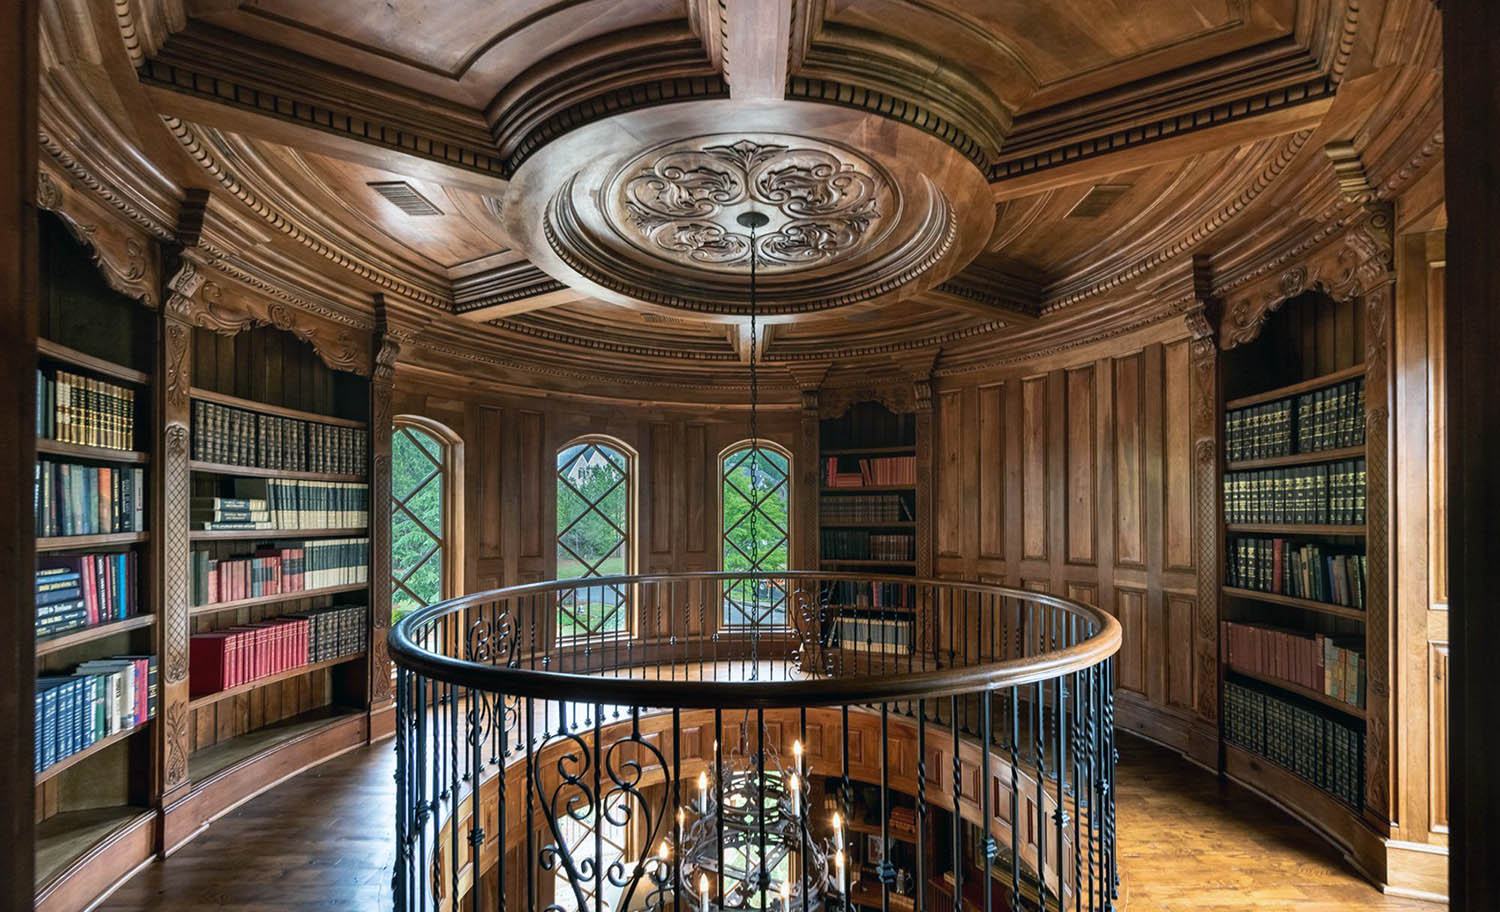 Beautiful round home library with wood walls and custom trim and wall paneling. Round coffered ceiling with real wood.